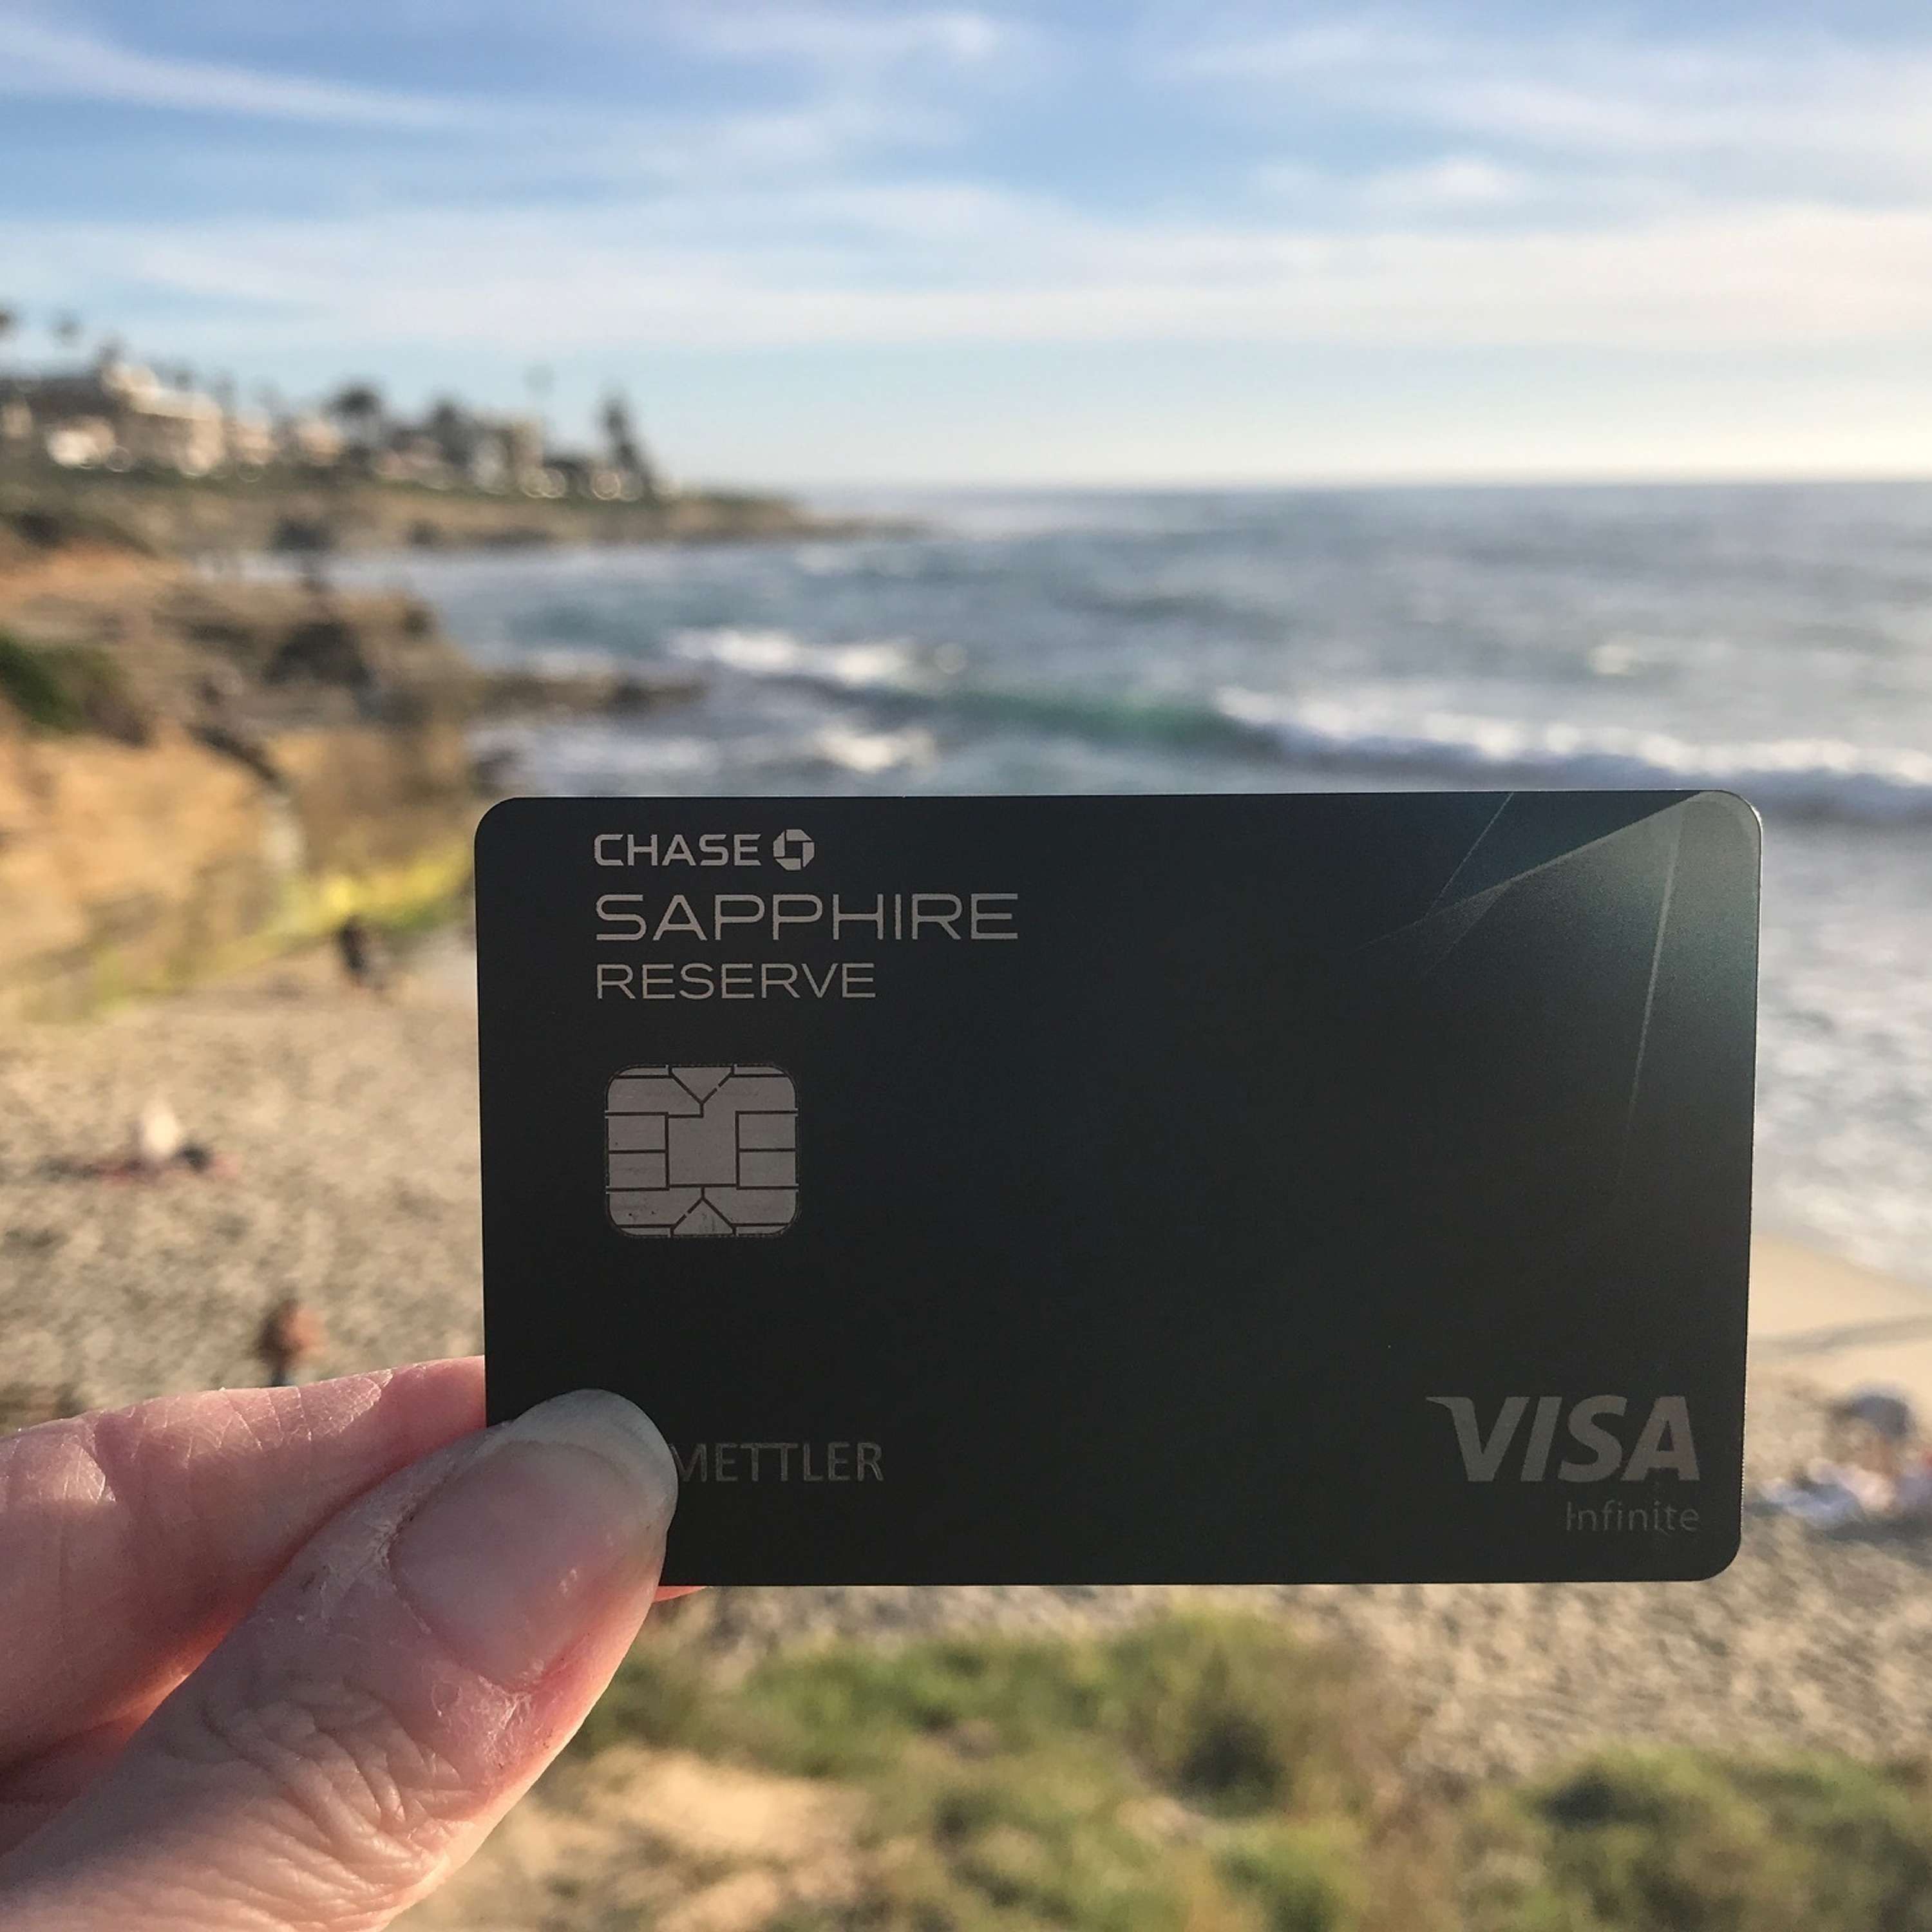 149 | Why I Don’t Recommend Getting Chase Sapphire Reserve